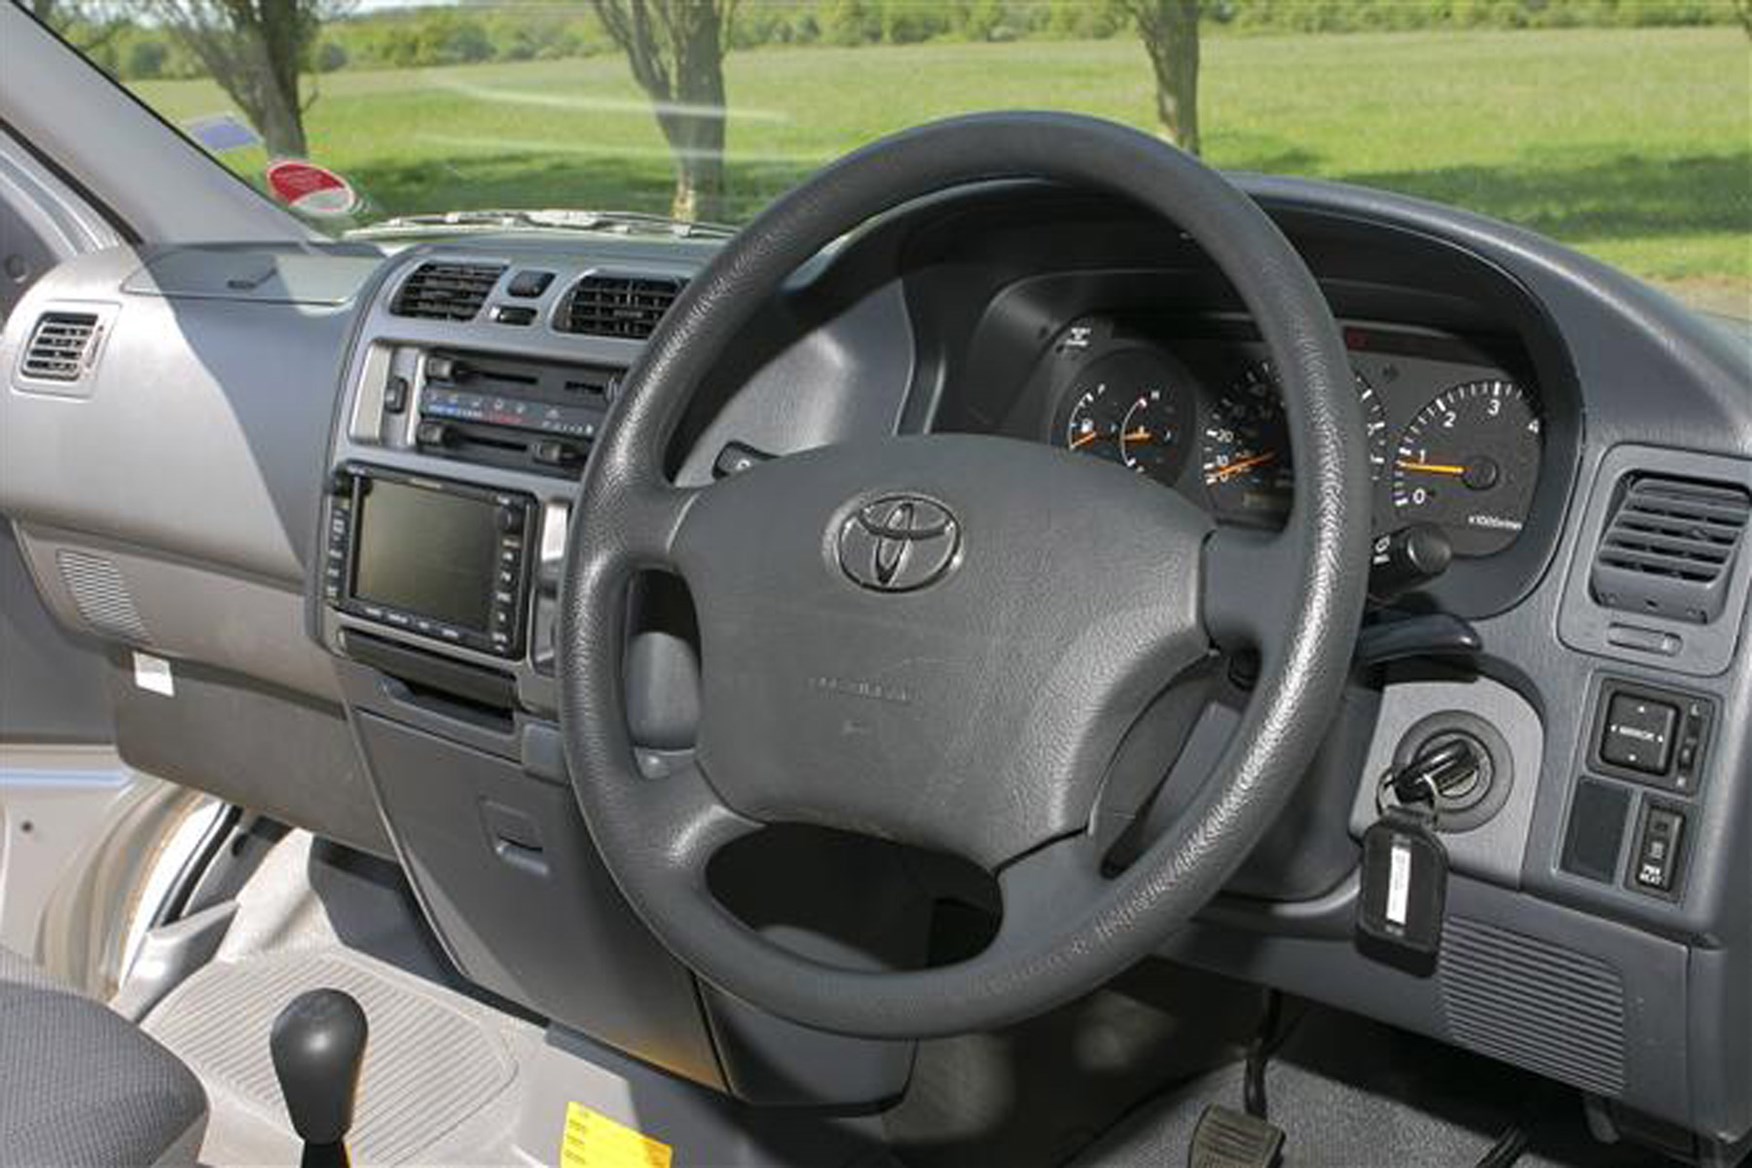 Toyota Hiace review on Parkers Vans - interior